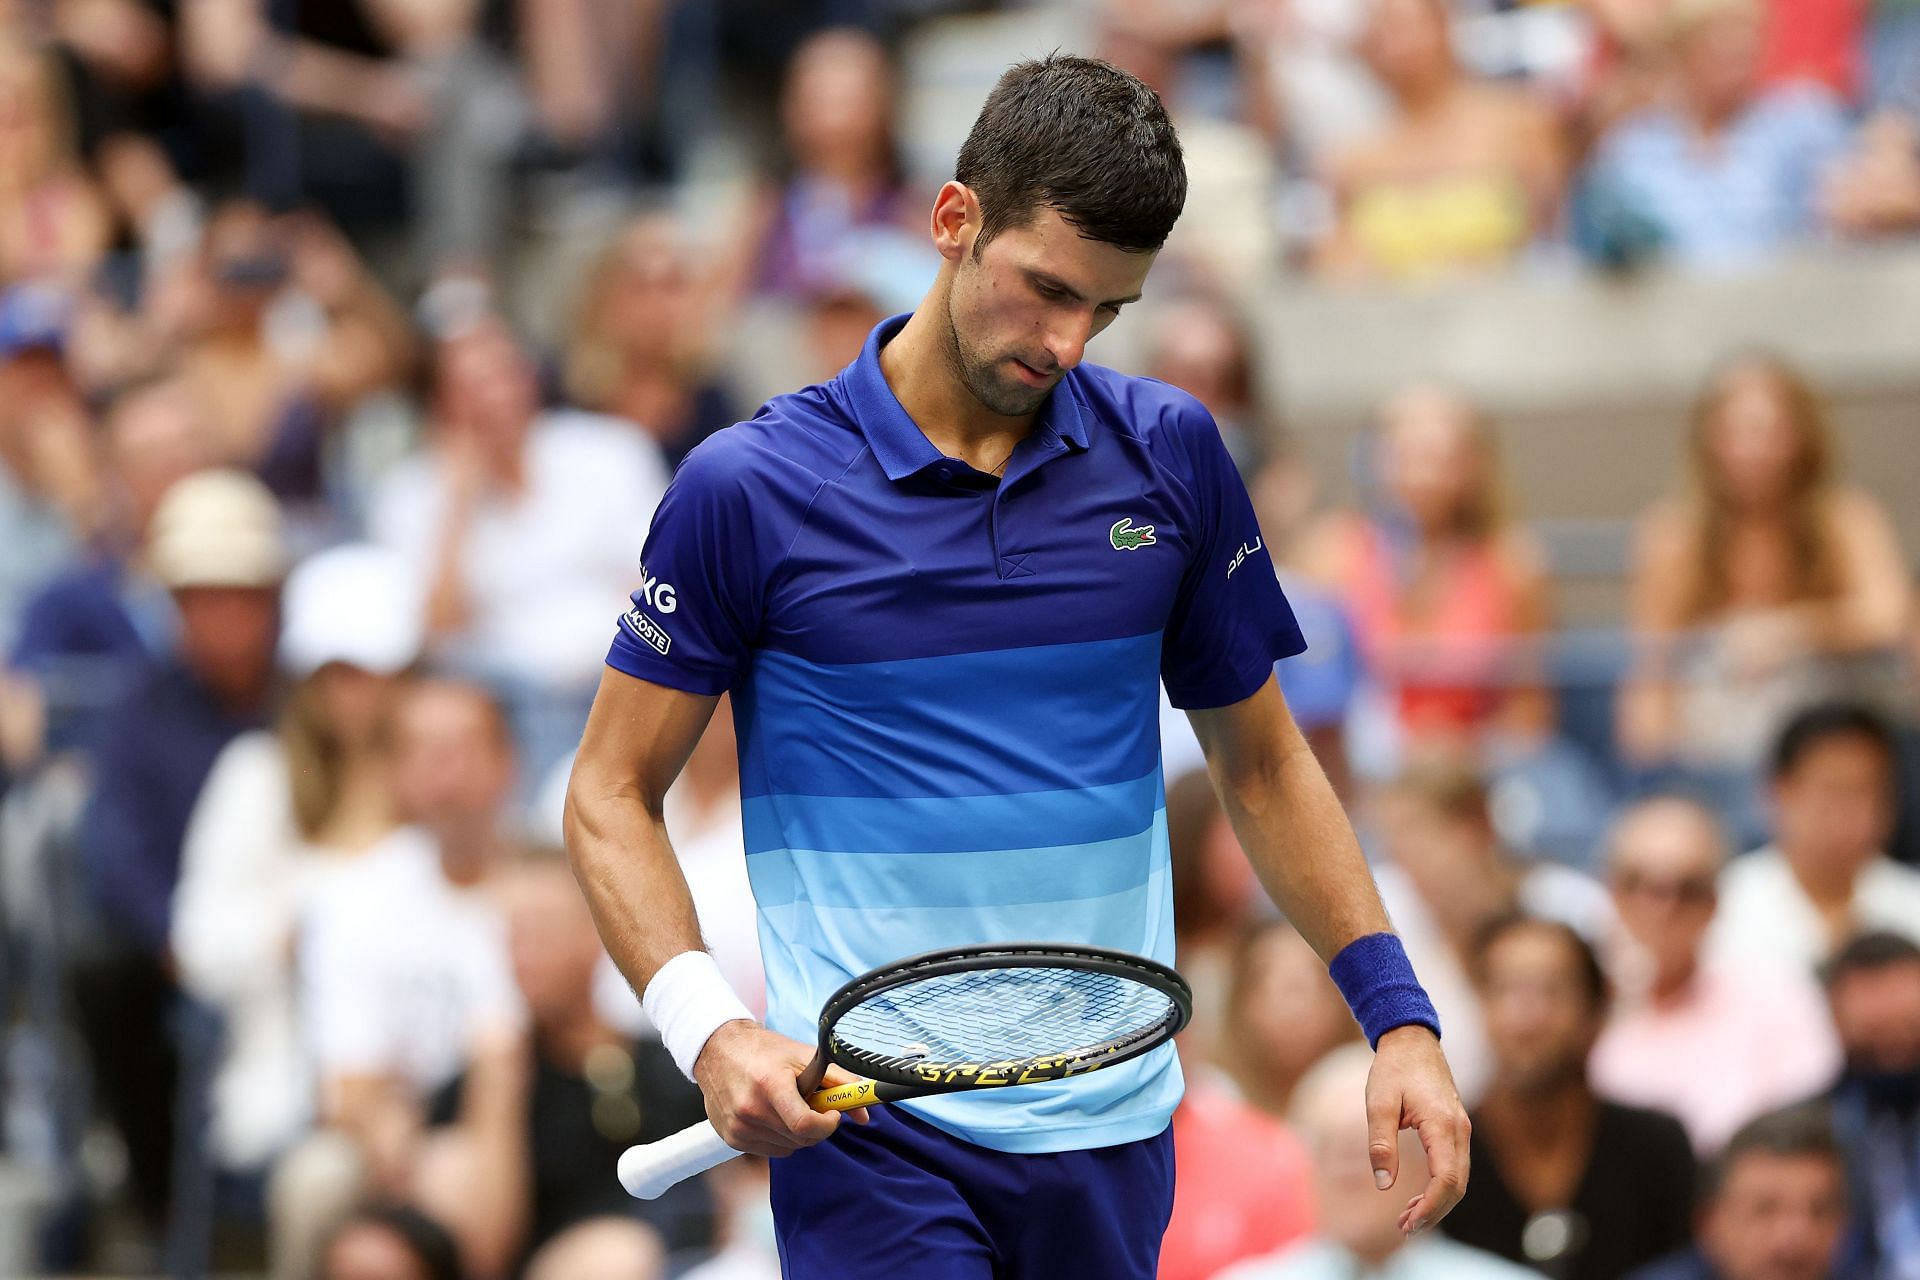 Novak Djokovic could miss US Open despite relaxation in US travel rules amid pandemic